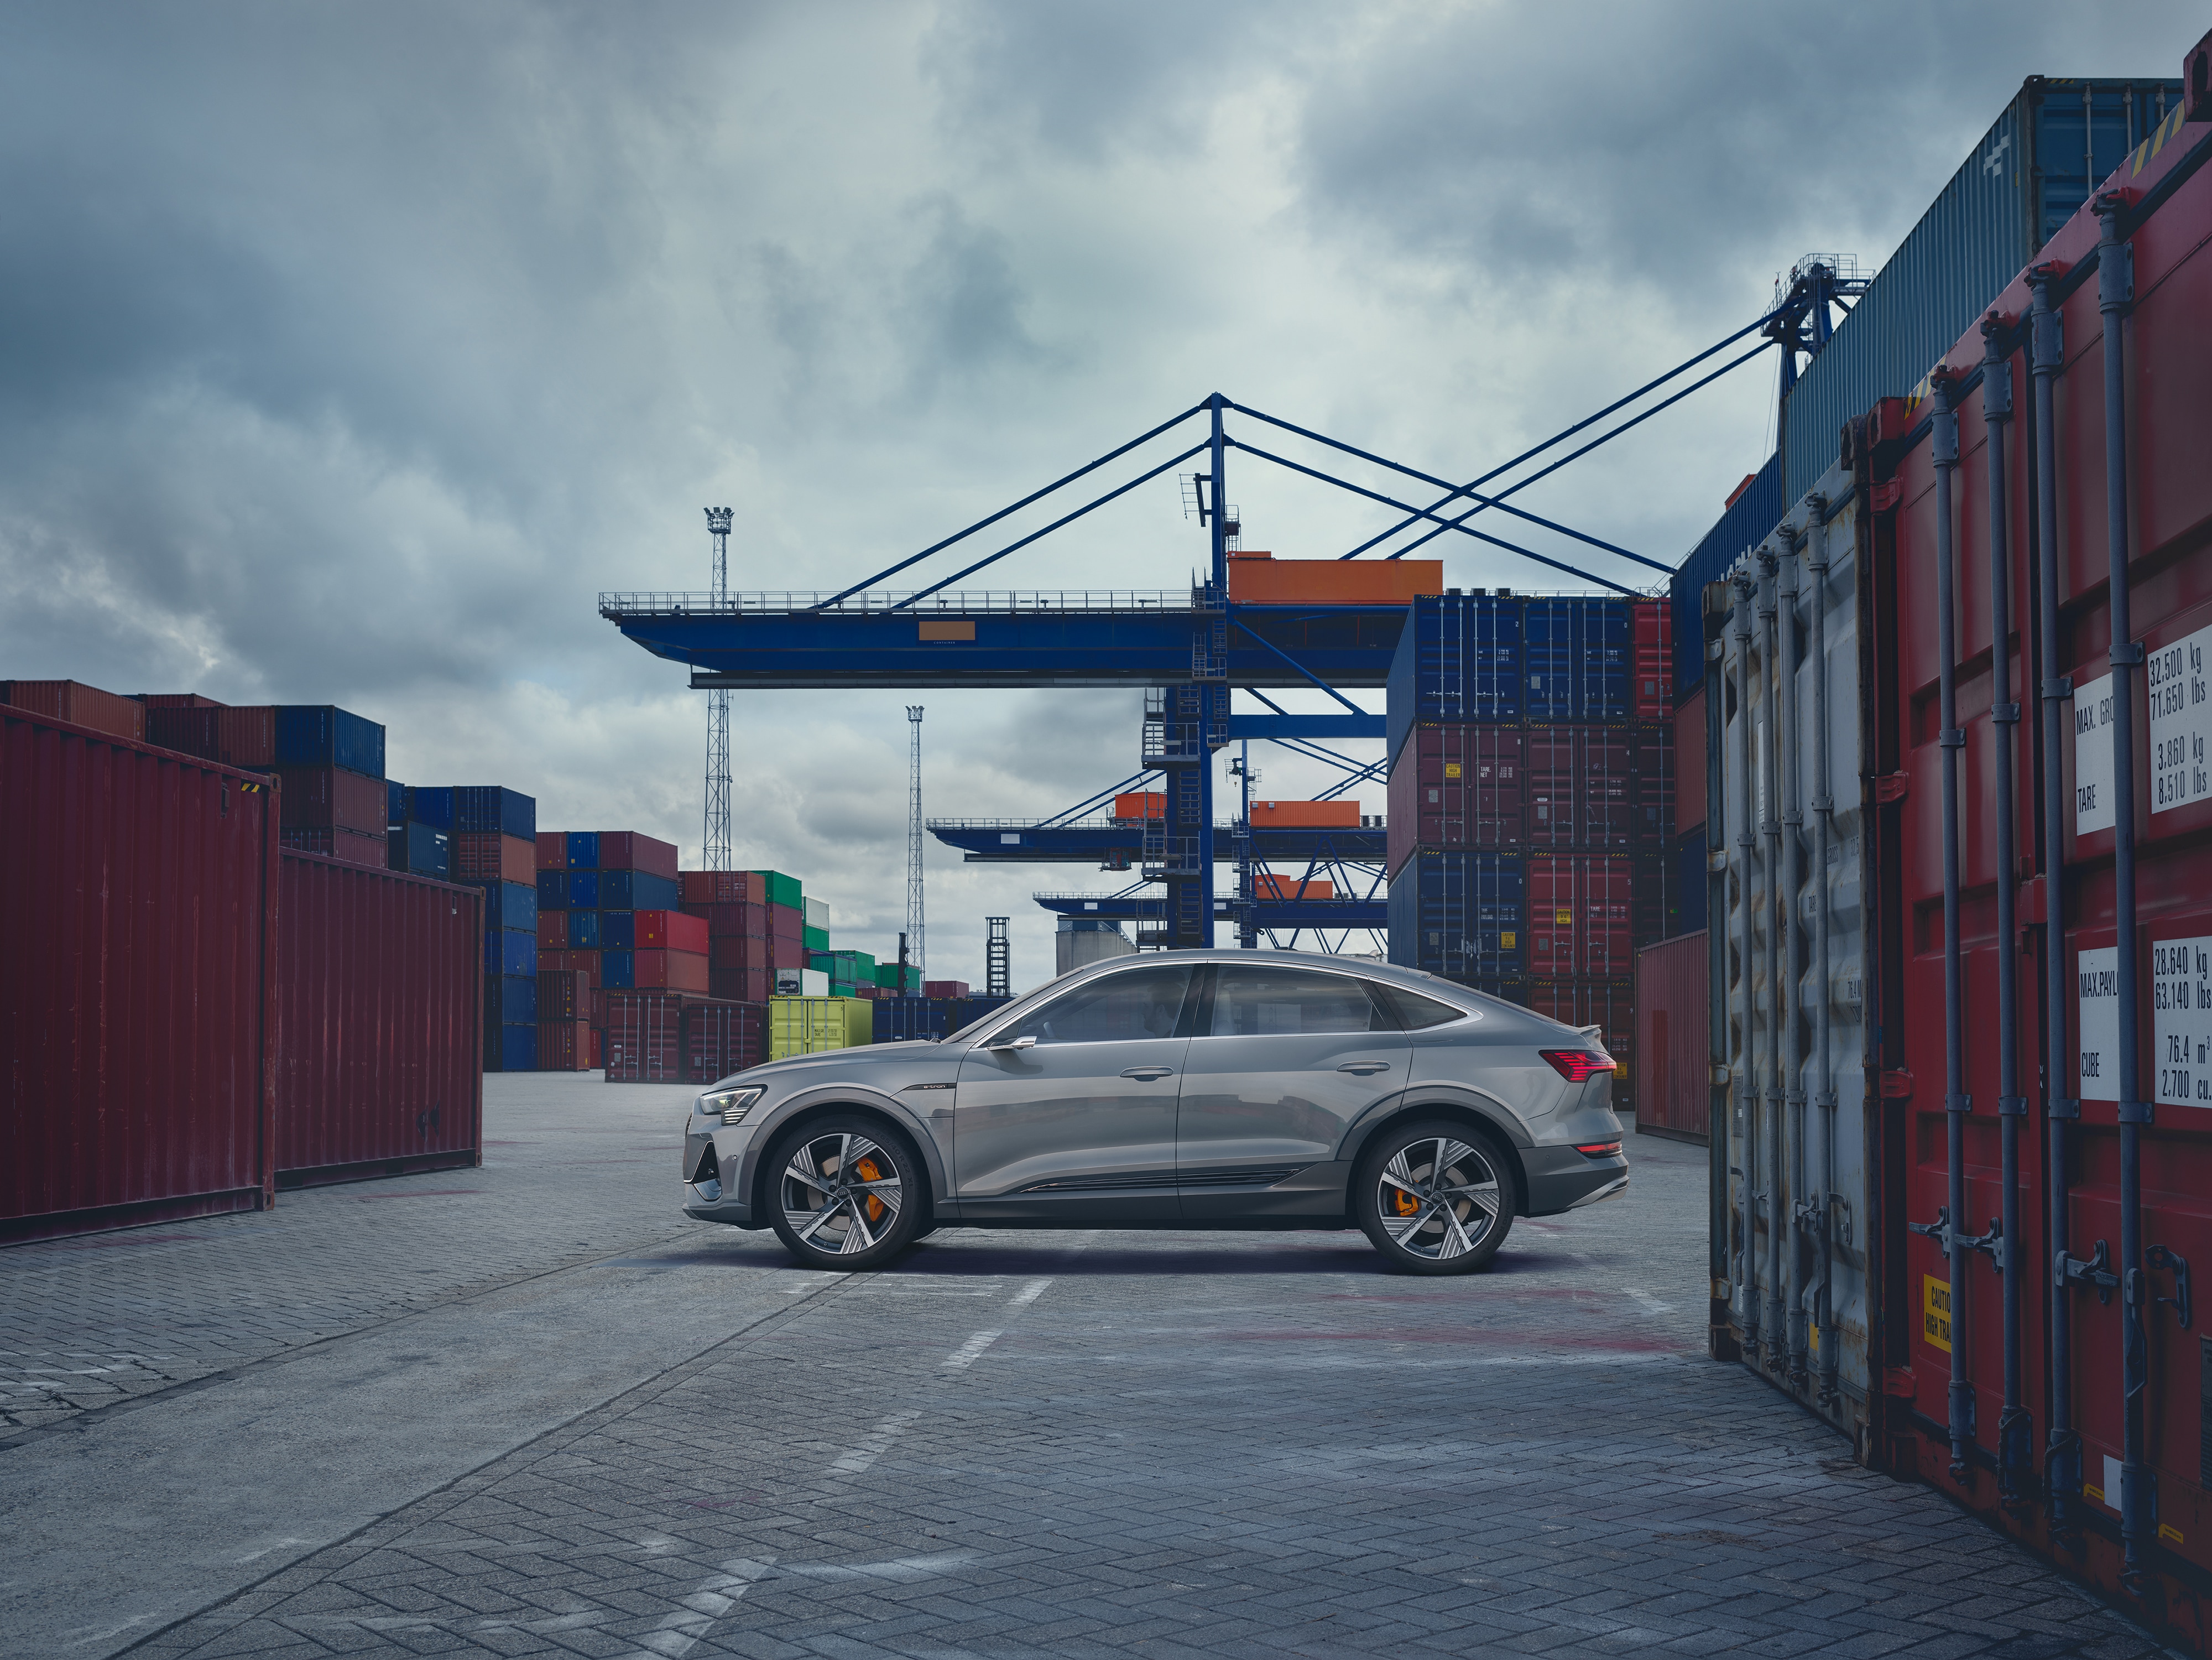 gray Audi e-tron electric luxury SUV parked at a loading dock among shipping containers